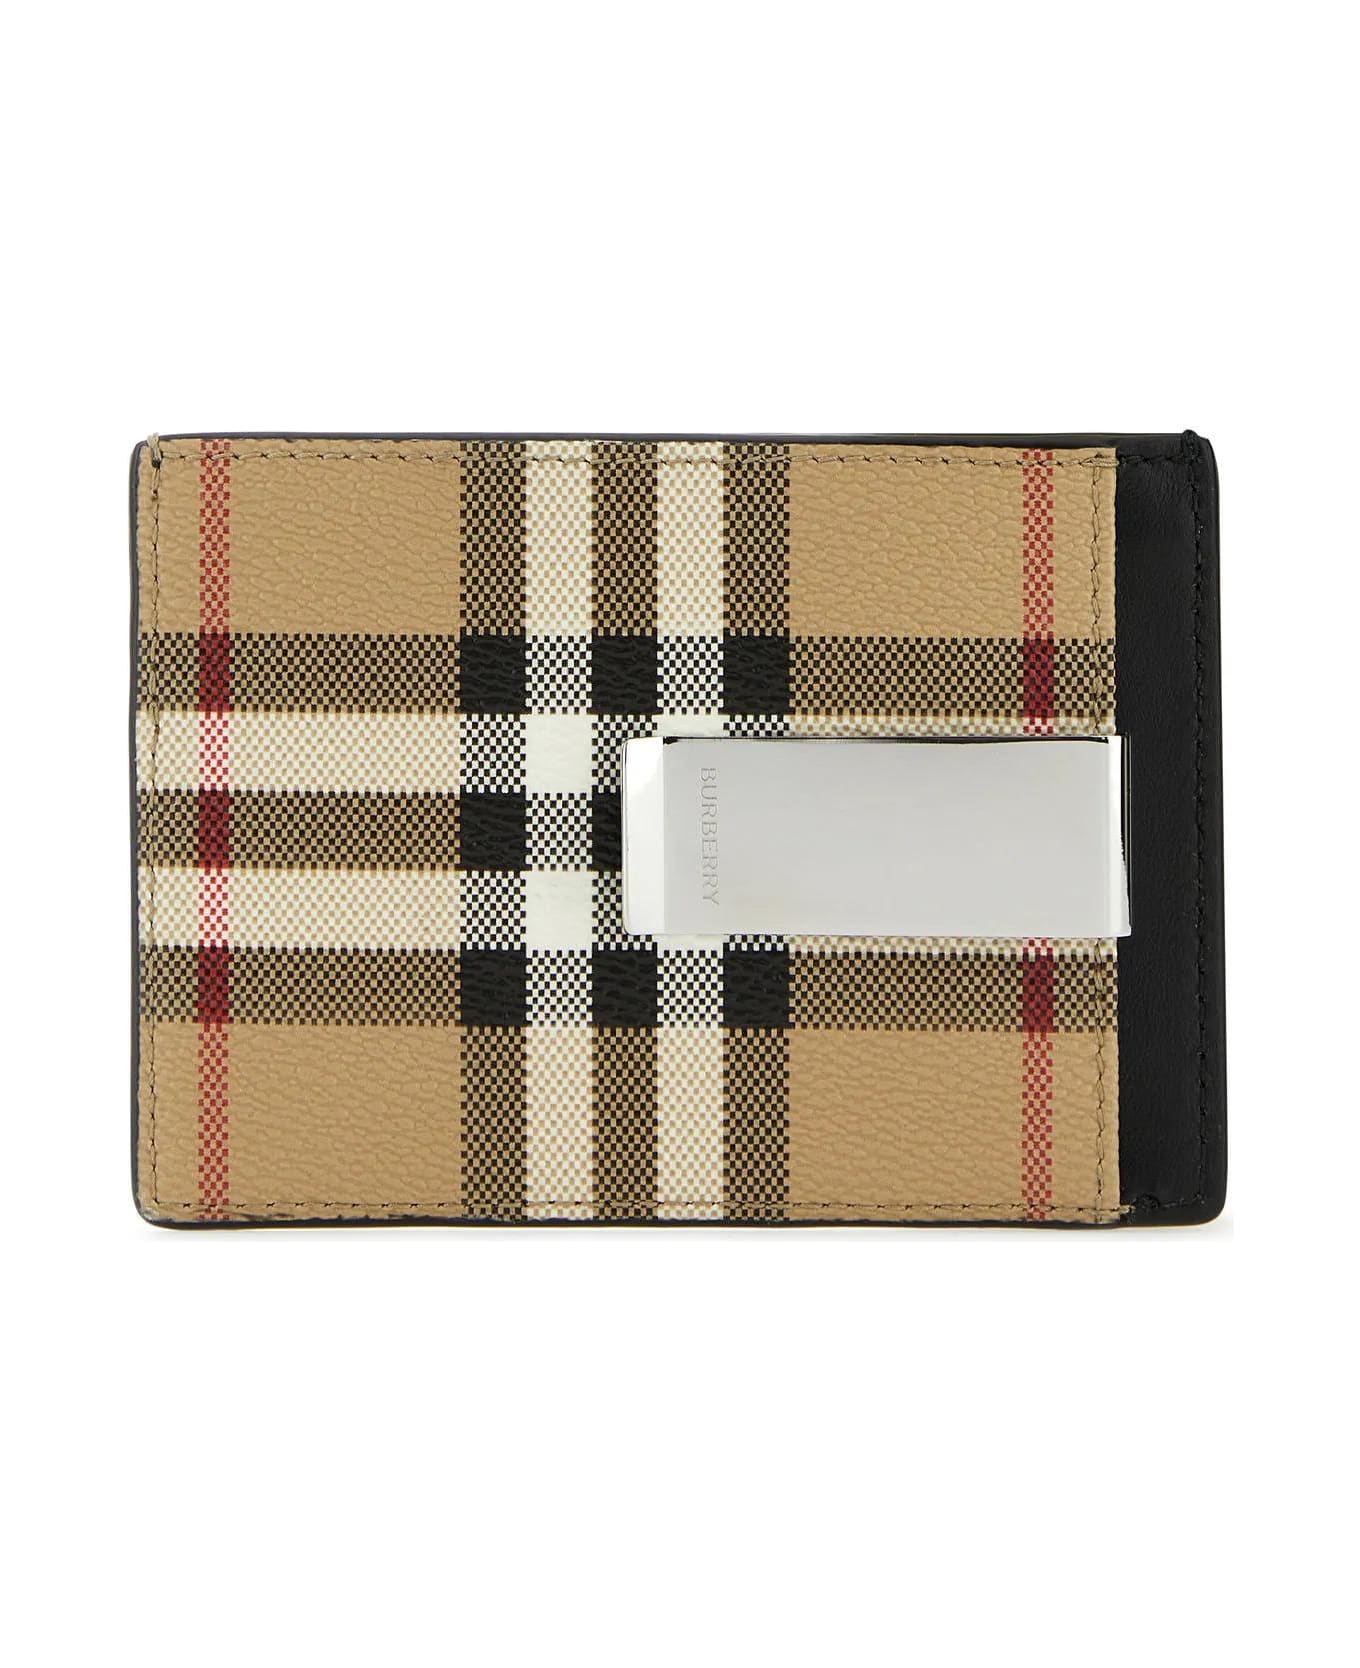 Burberry Printed Canvas Cardholder - Archive Beige 財布